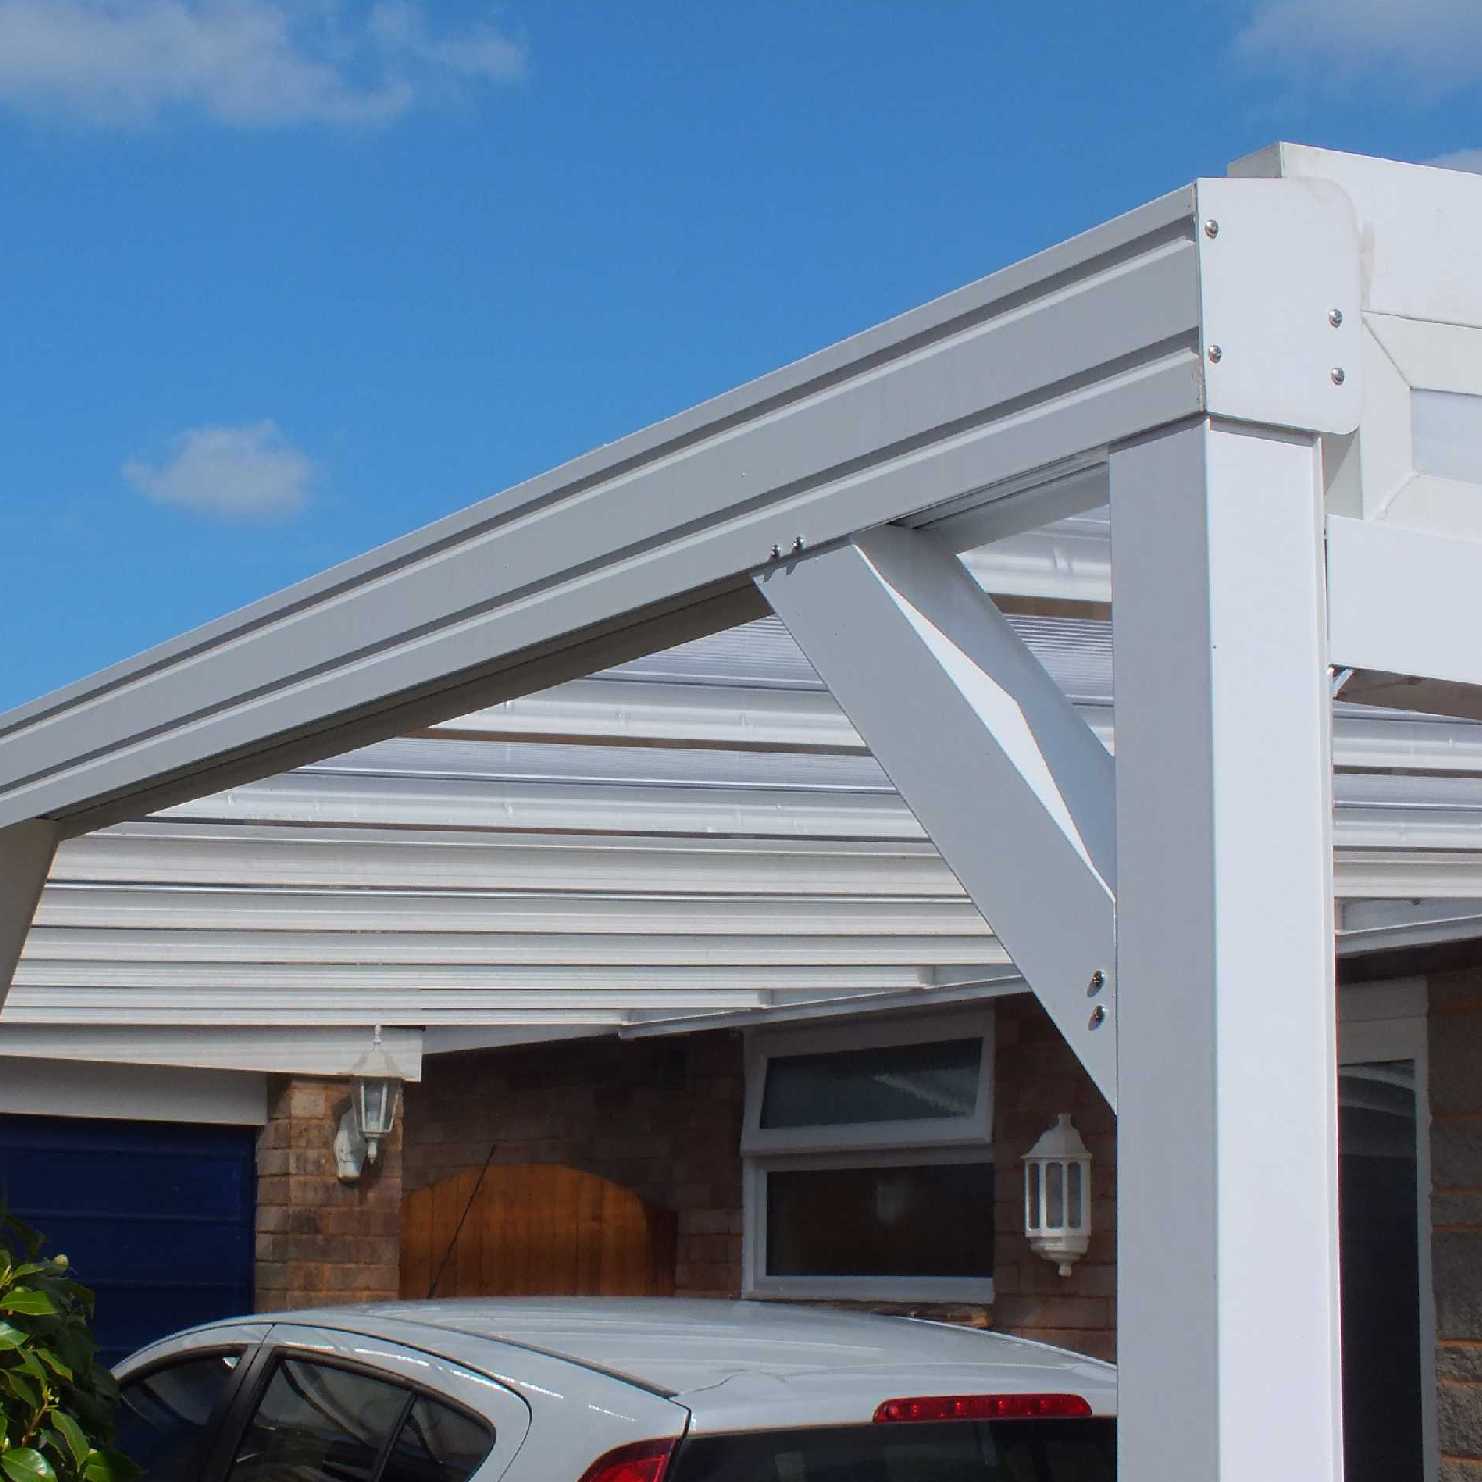 Buy Omega Smart Lean-To Canopy, White with 16mm Polycarbonate Glazing - 6.3m (W) x 4.0m (P), (4) Supporting Posts online today